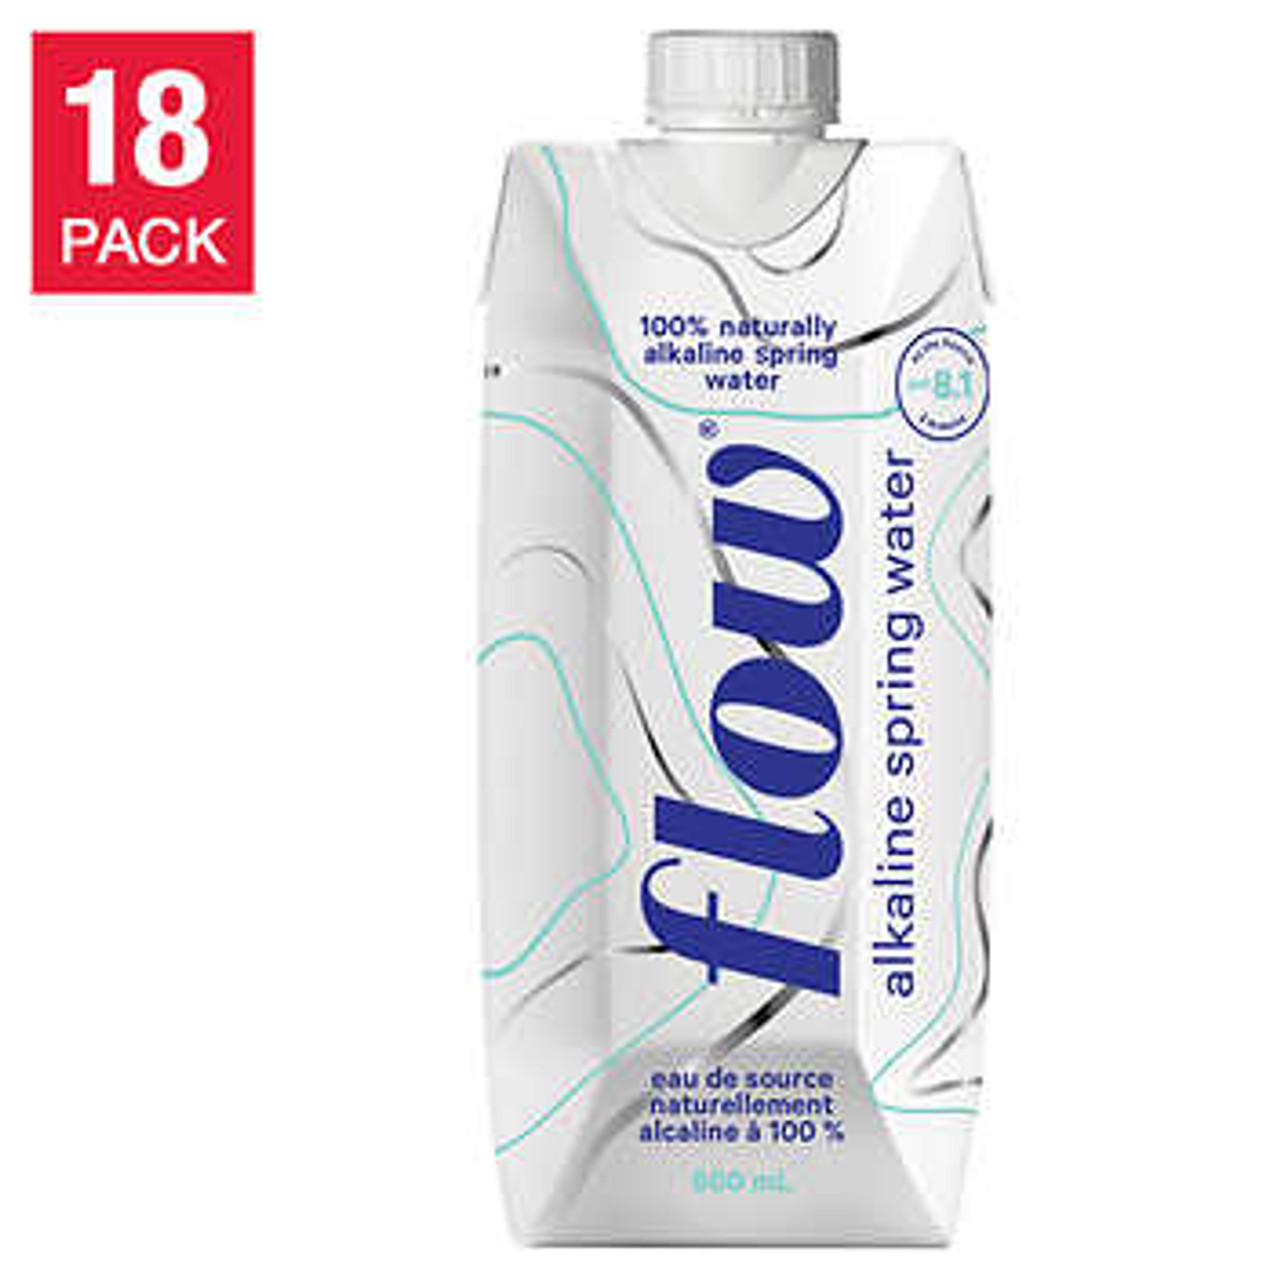 Flow Naturally Alkaline Original Spring Water - 18 Bottles, 500 mL Each - Hydration with a Natural pH Balance
- Chicken Pieces